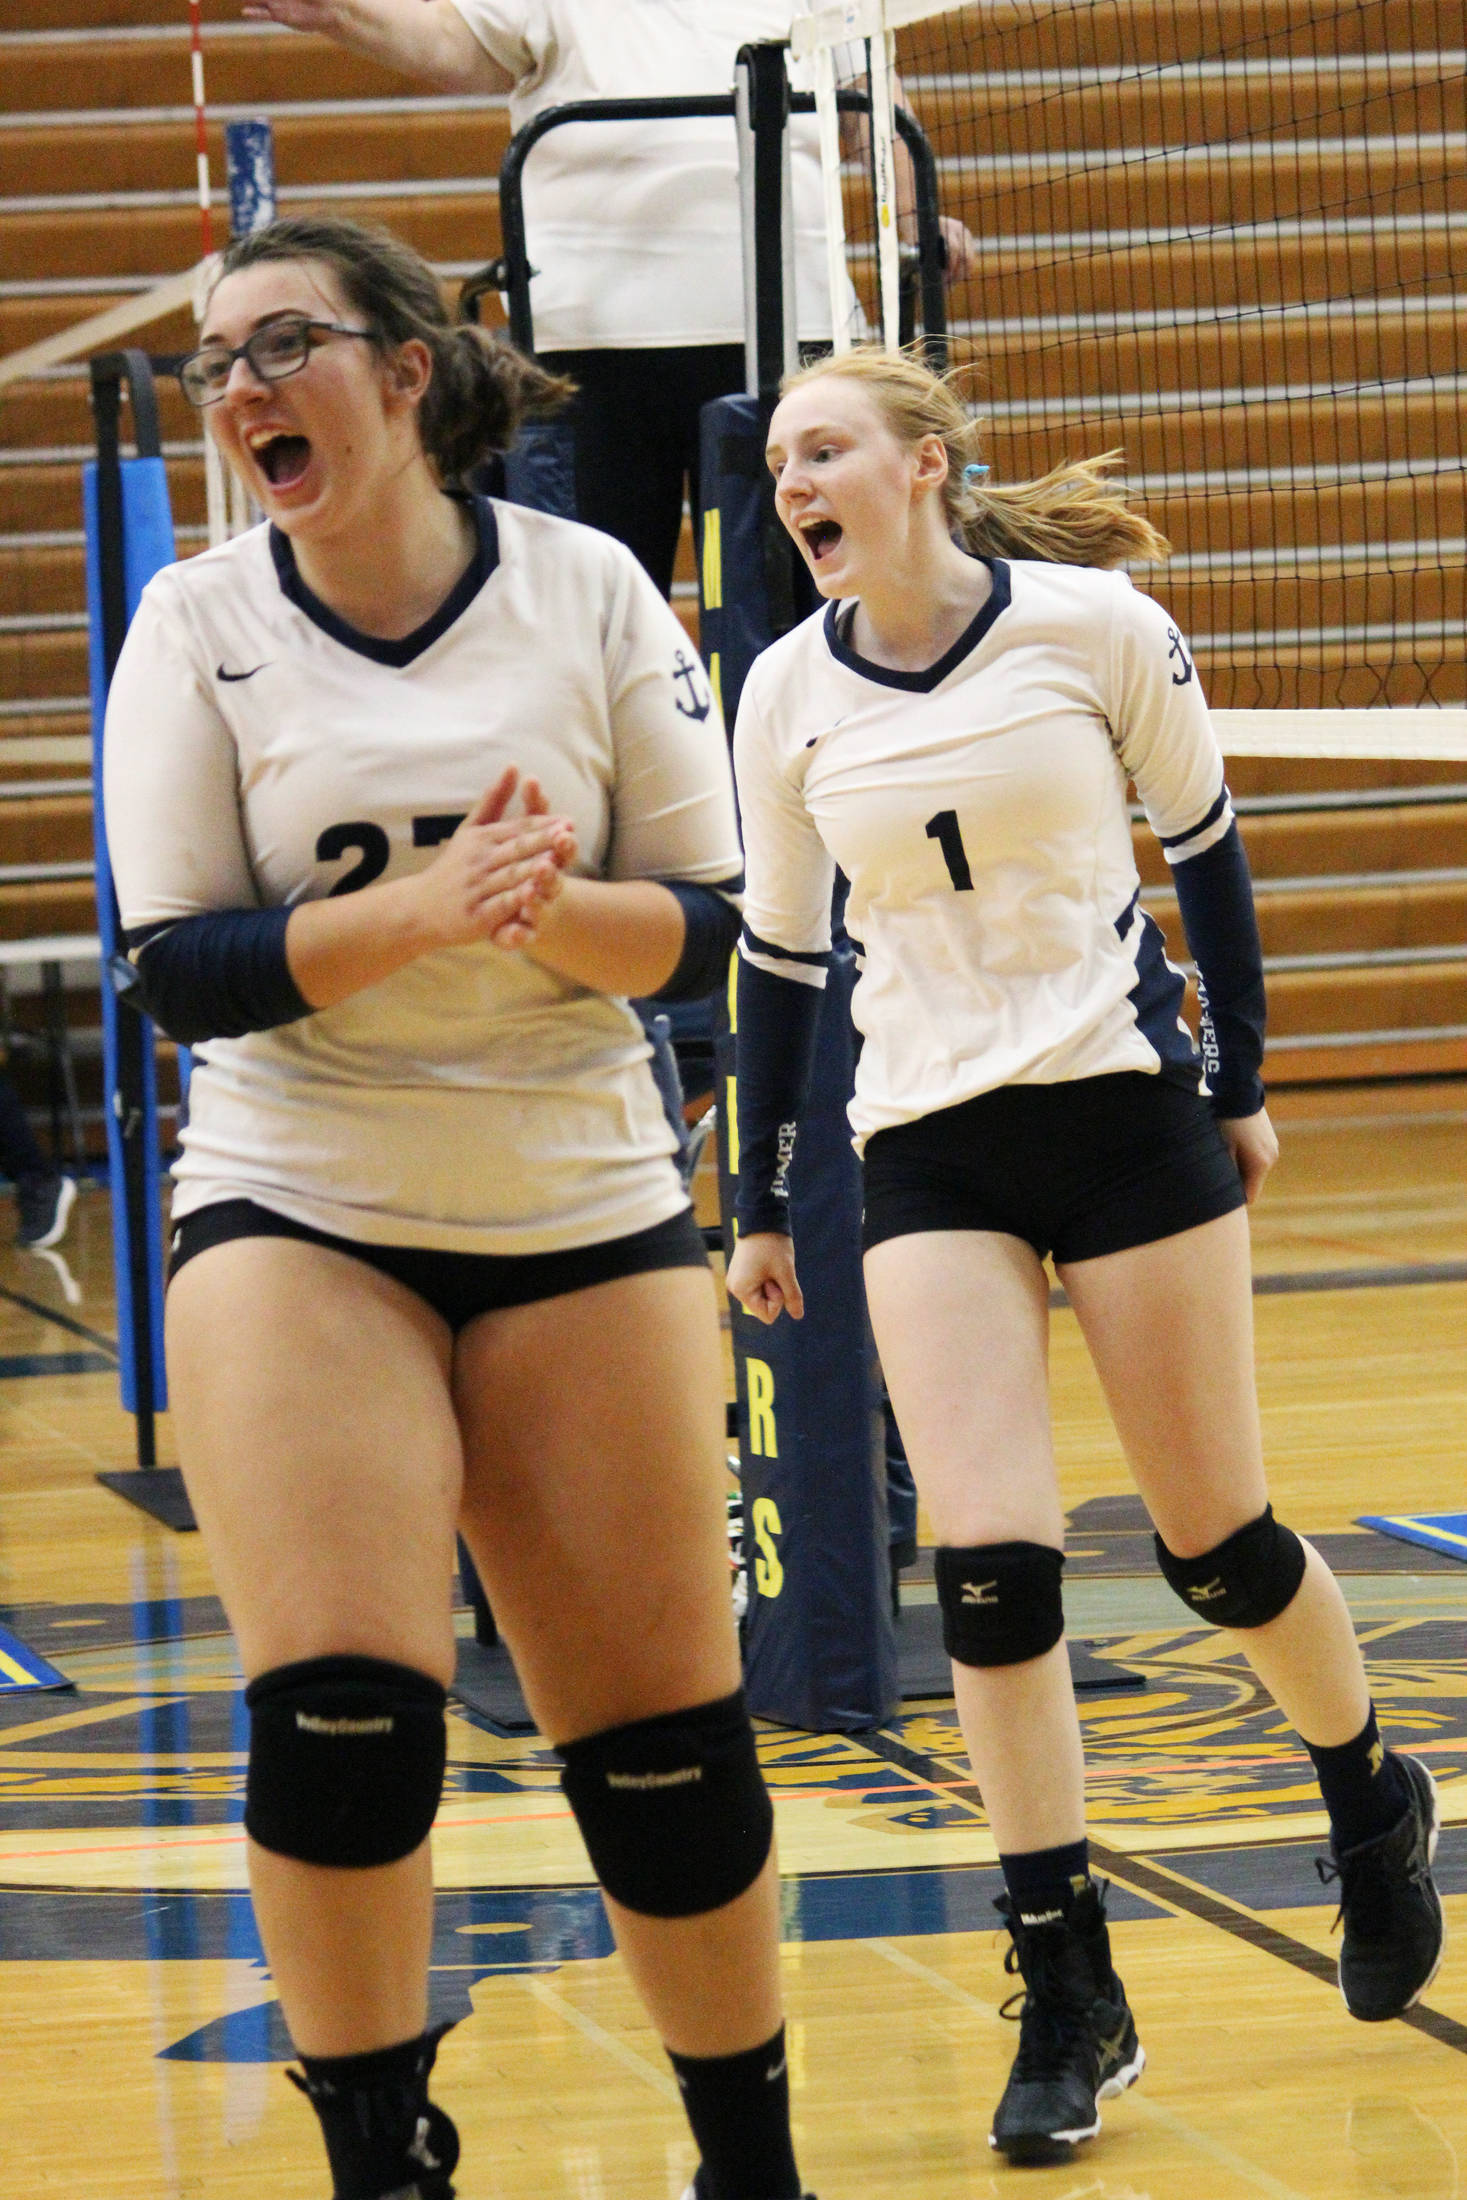 Homer volleyball players Tonda Smude (left) and Kelli Bishop (right) celebrate earning a point in a Saturday, Aug. 24, 2019 game against Nikiski Middle High School during the Homer Jamboree tournament at the Alice Witt Gymnasium in Homer, Alaska. (Photo by Megan Pacer/Homer News)